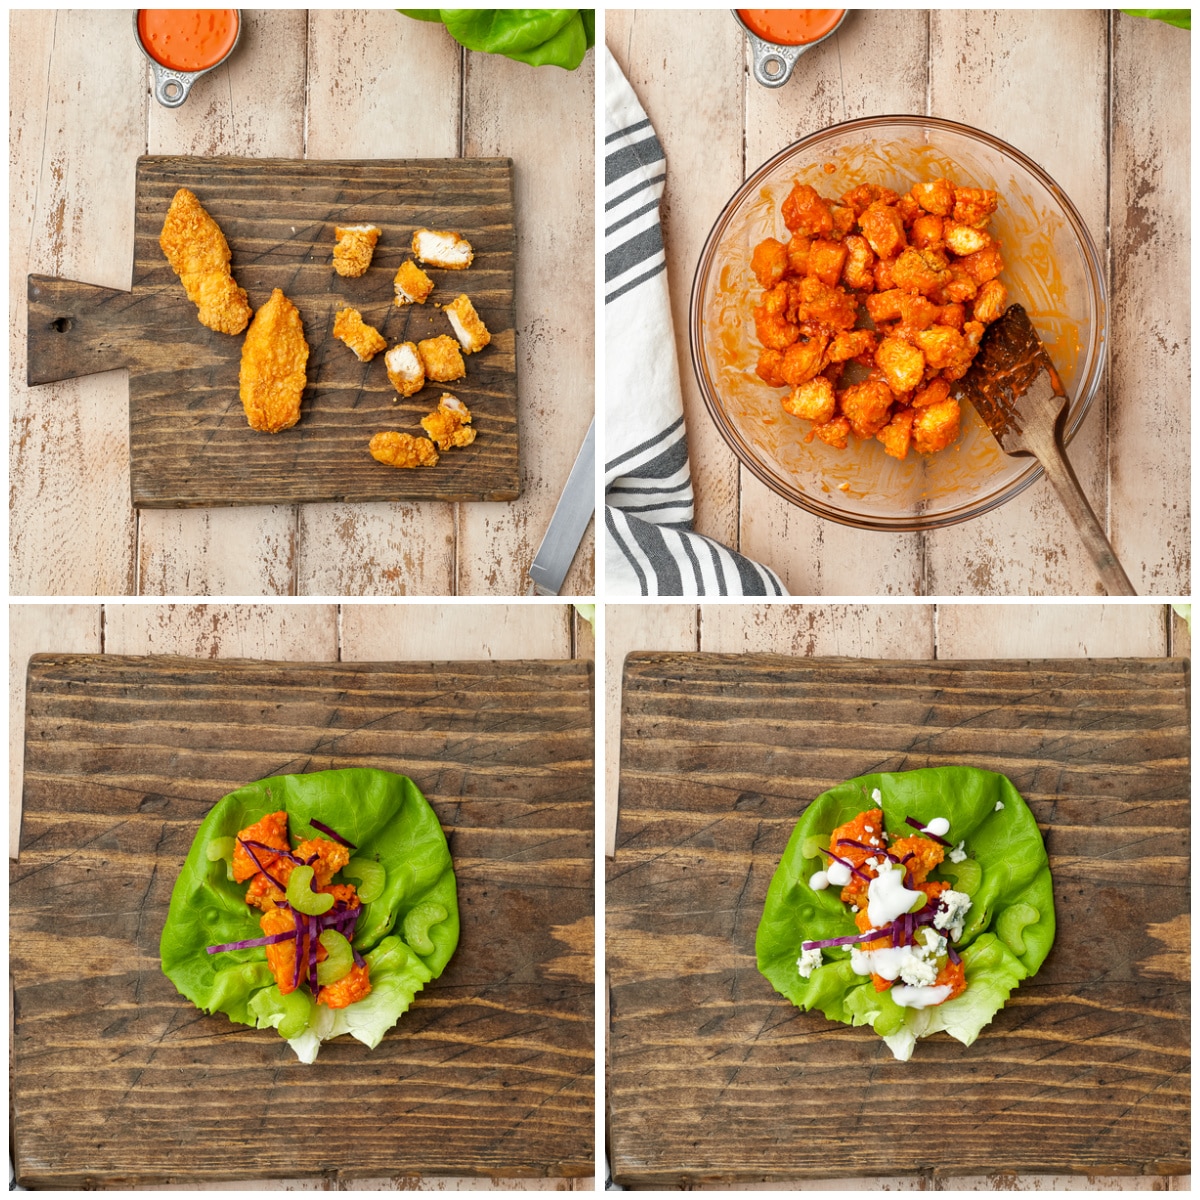 Step by step photos on how to make Buffalo Chicken Lettuce Wraps.